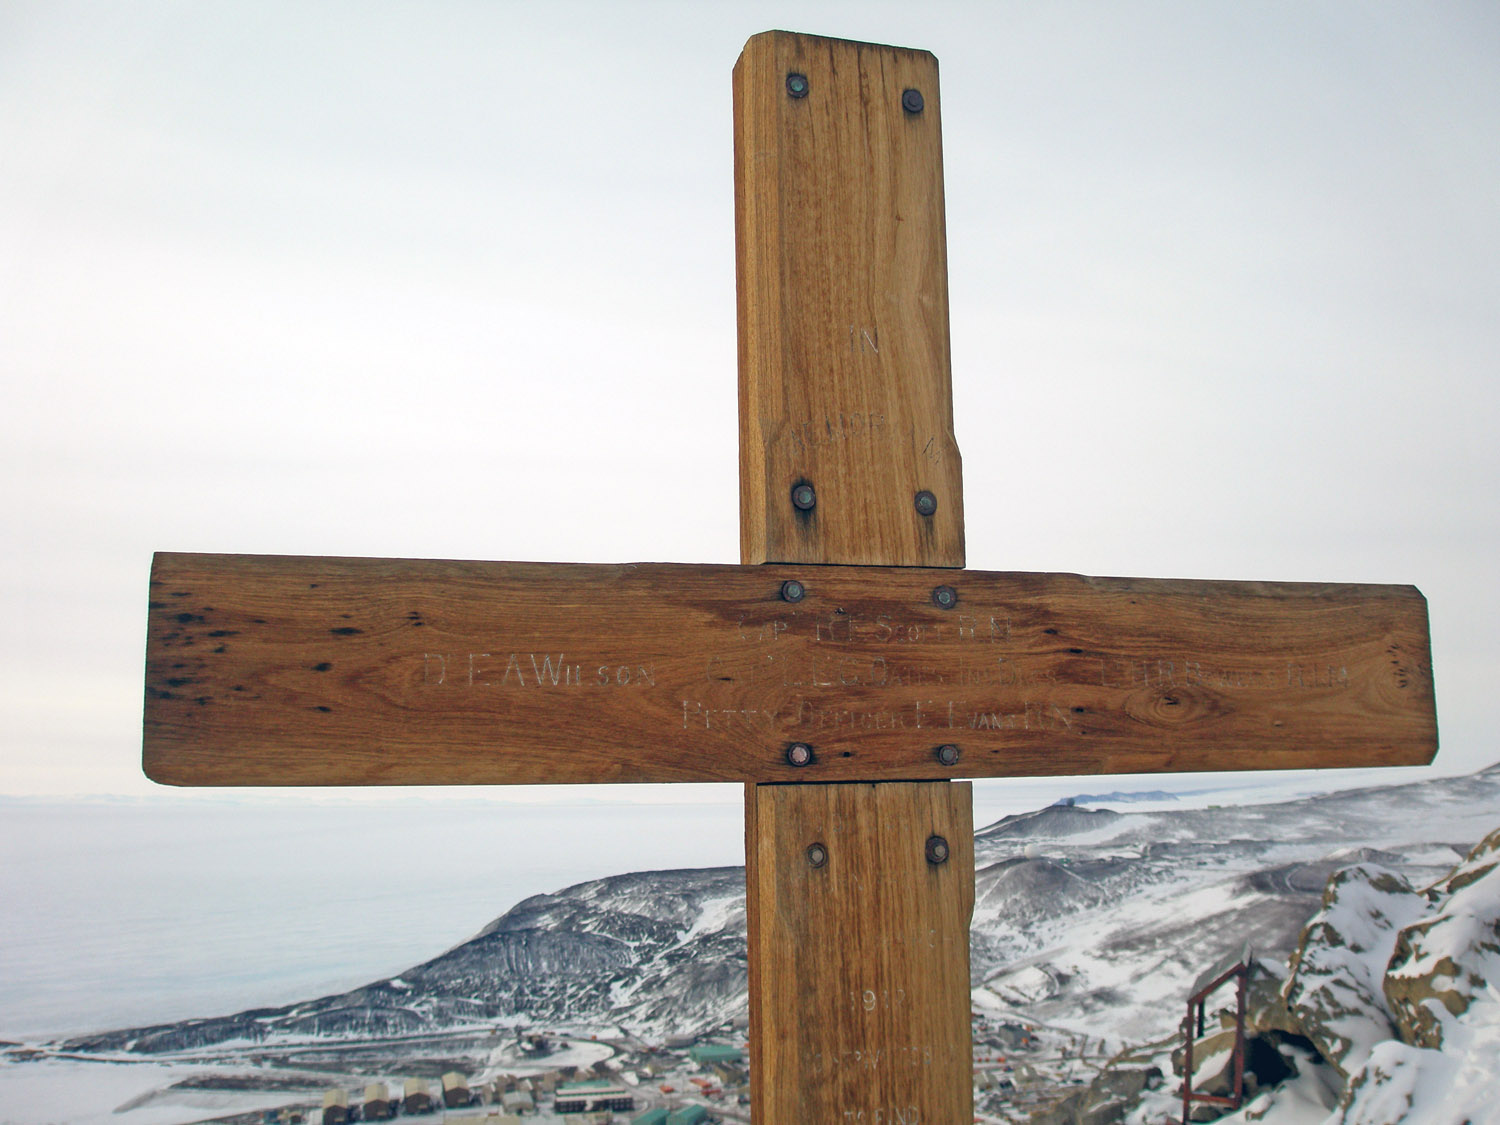 Memorial Cross to Captain Scott's Expedition, Top of Observation Hill